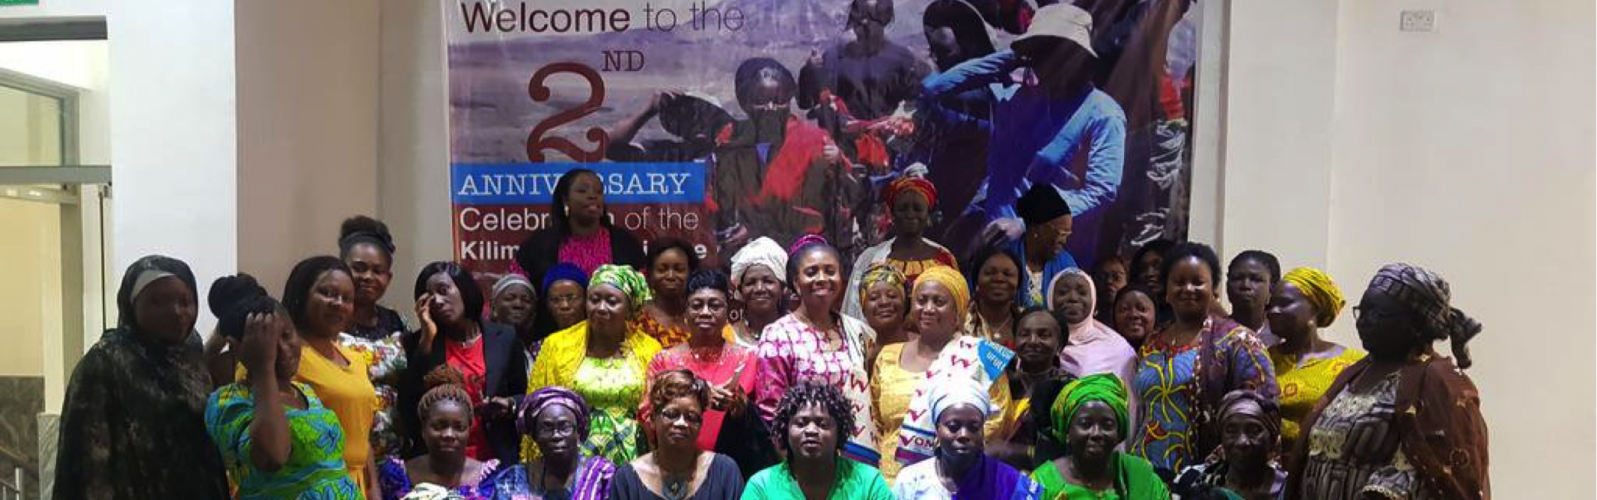 Walk the Talk:Rural women demand for accountability on land rights in Africa